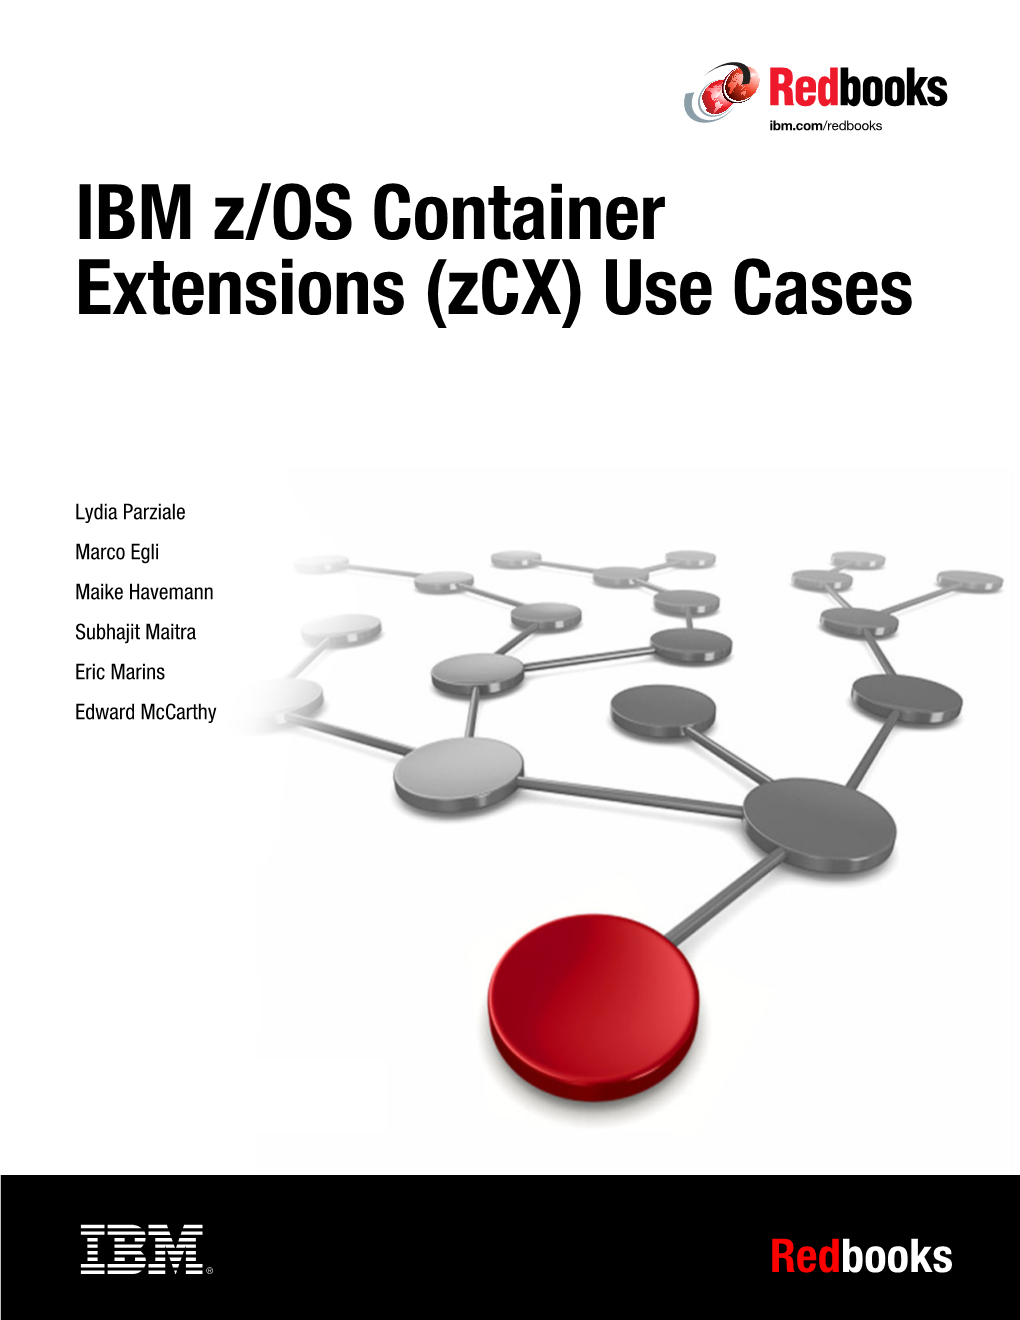 Zcx) Use Cases